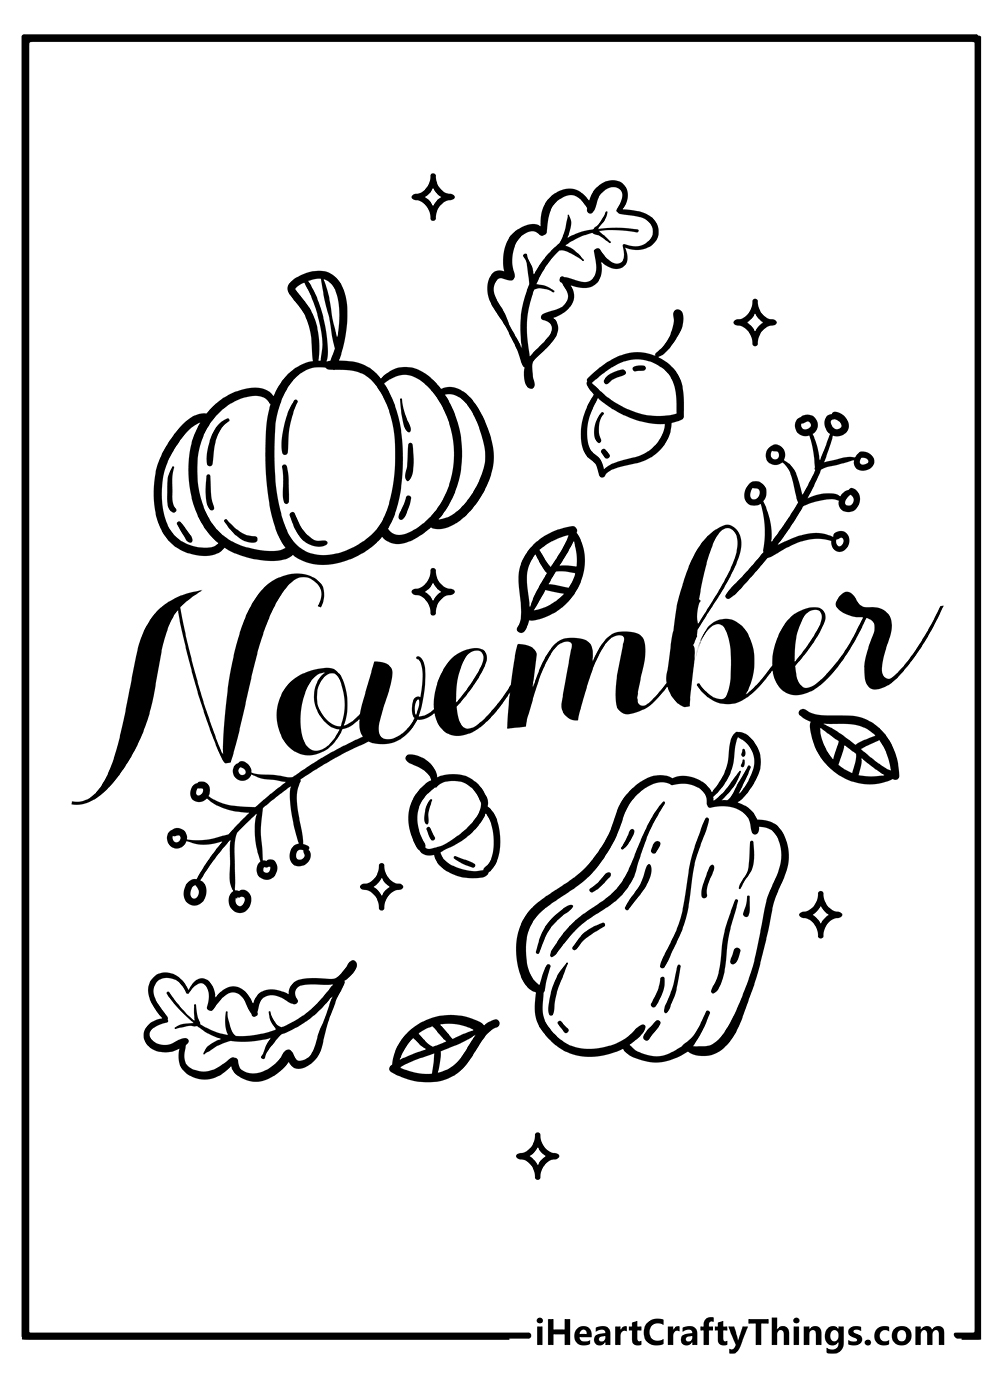 November Coloring Book for adults free download